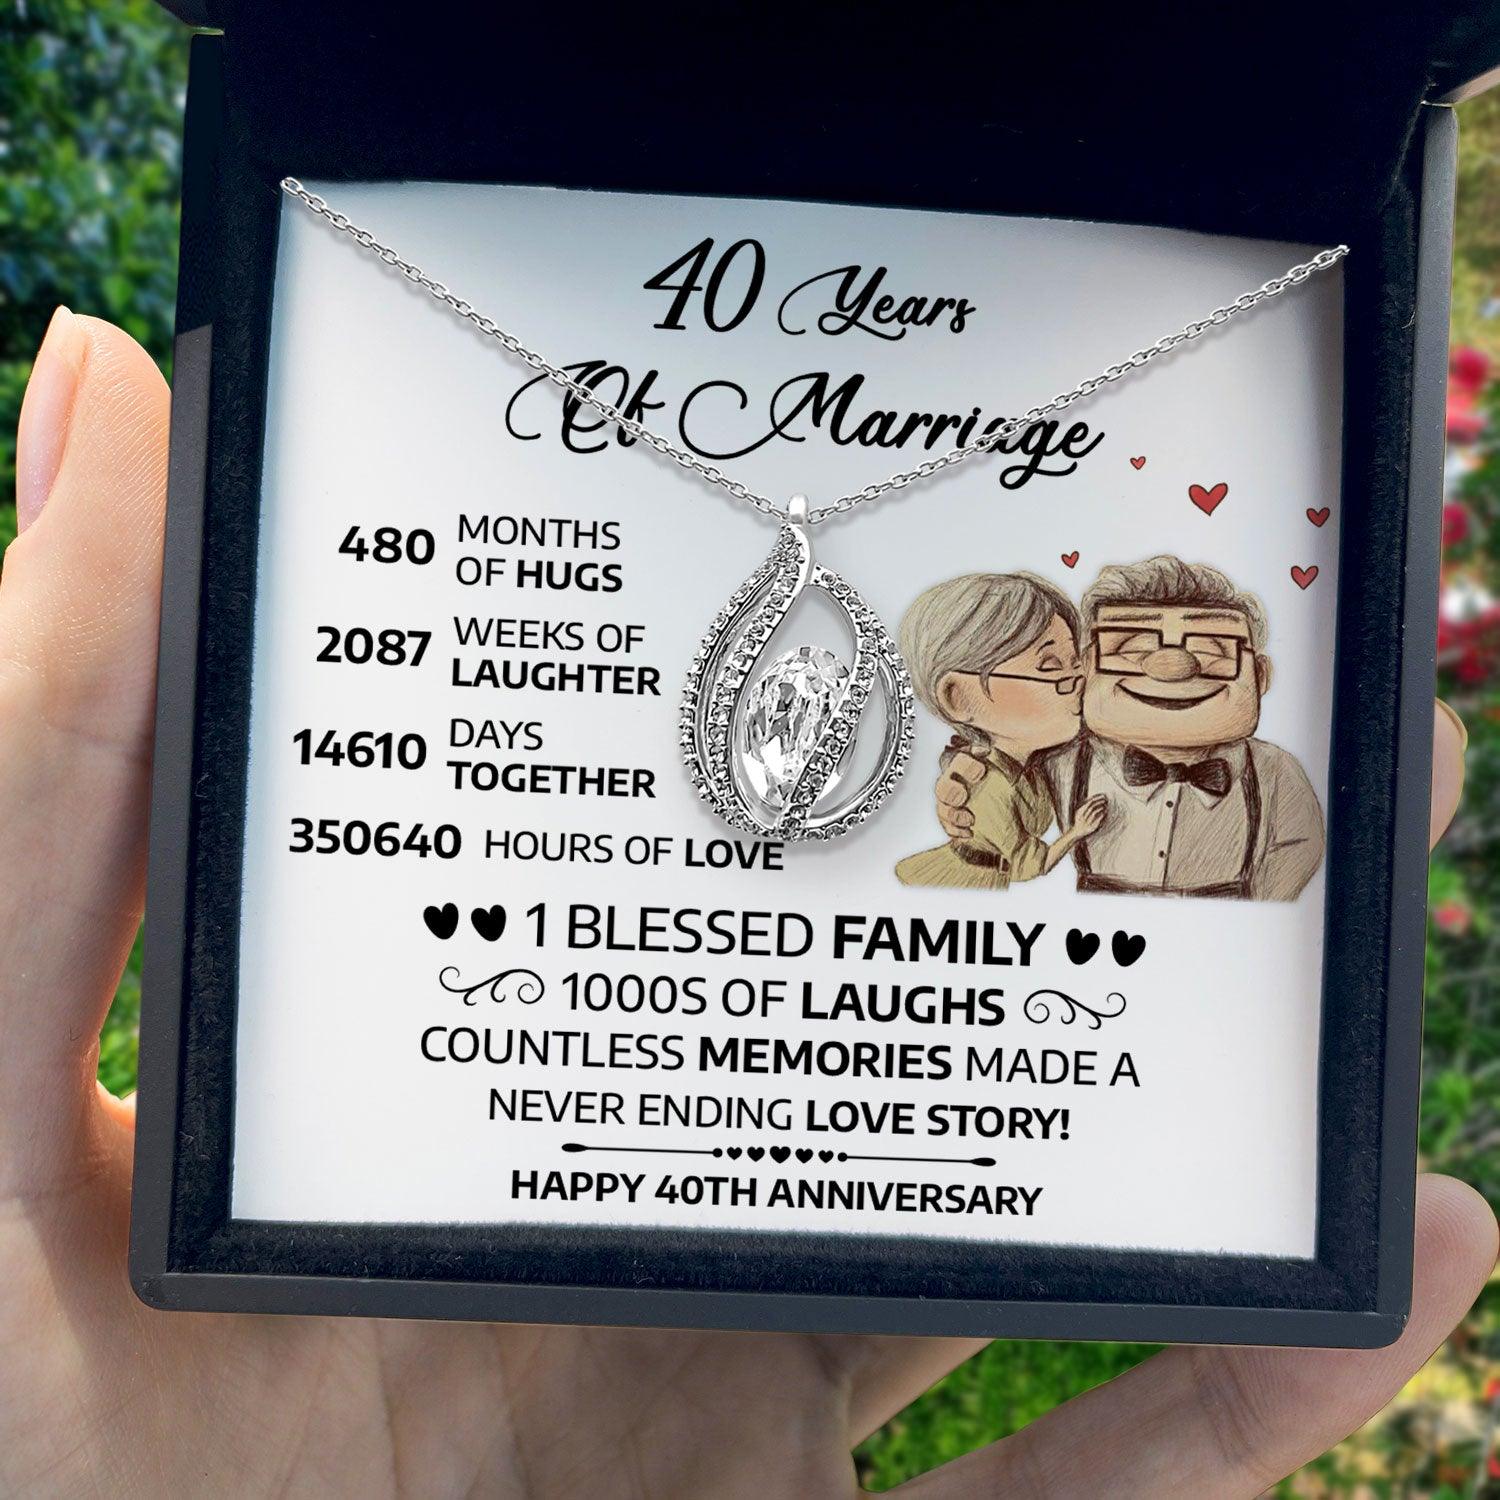 Anniversary Gifts for Her -  480 Months Of Hugs, 2087 Weeks Of Laughter, Happy 40th Anniversary - Orbital Birdcage Necklace - TRYNDI